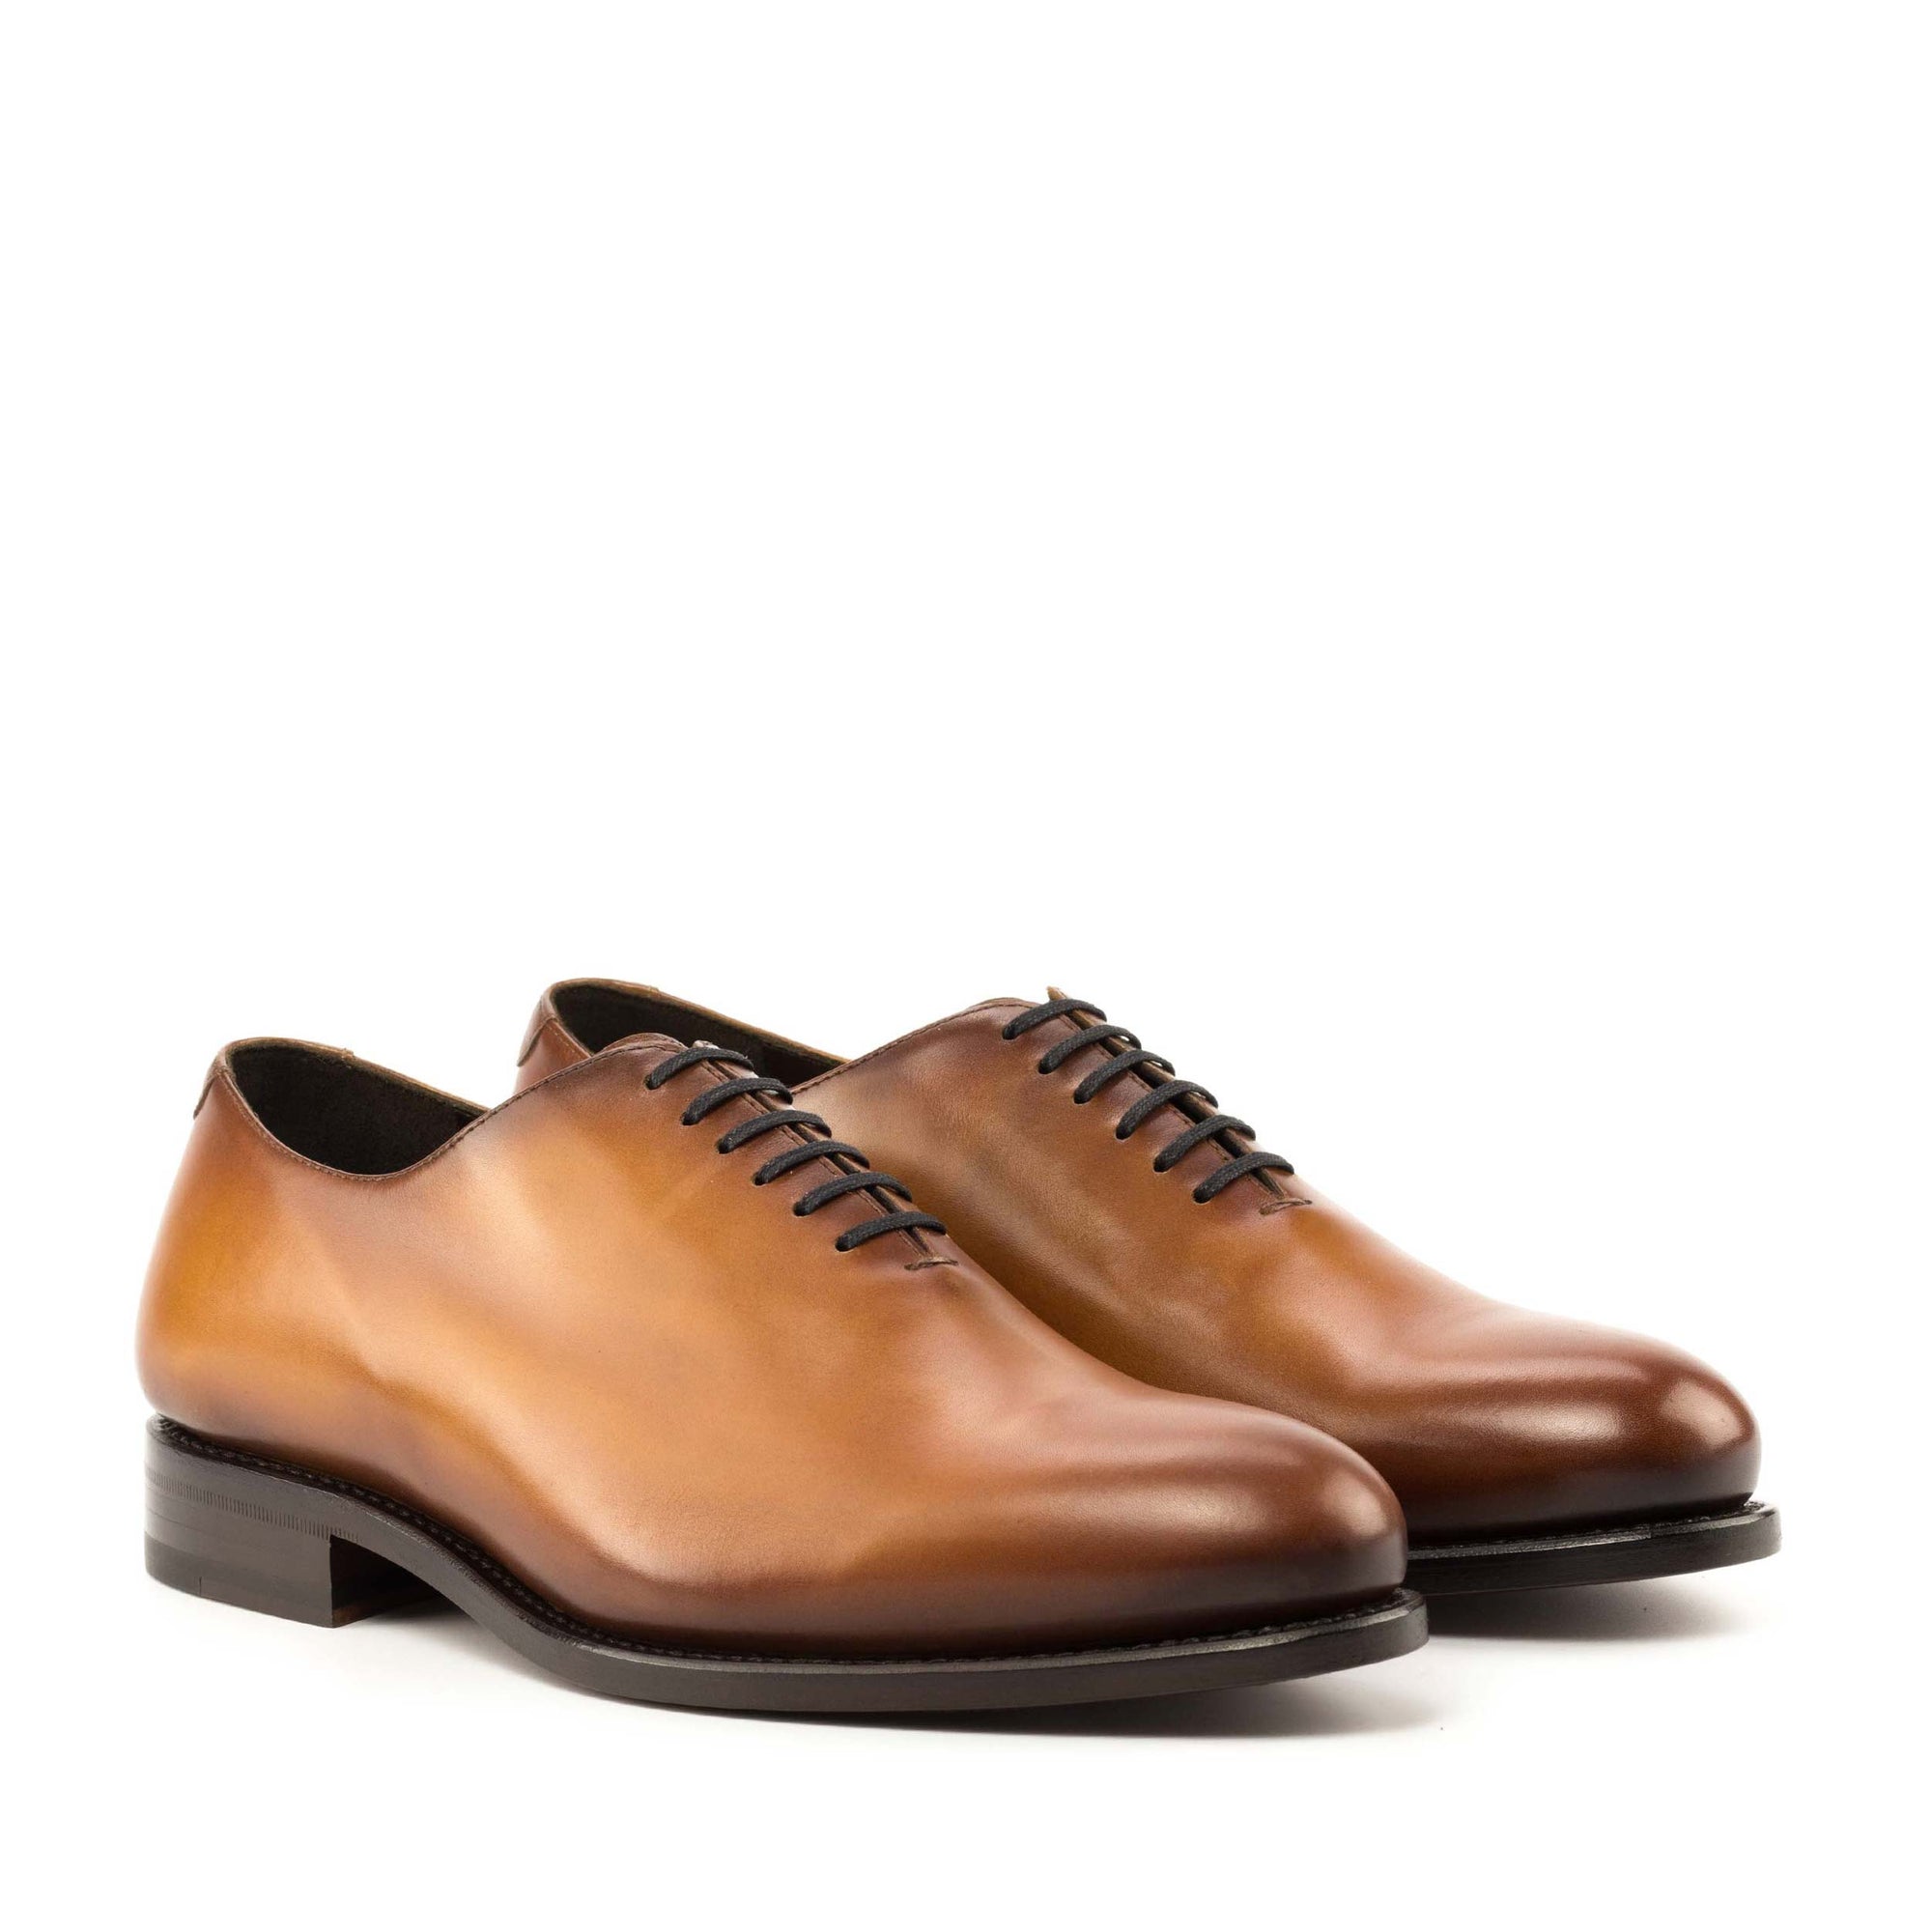 Whole Cut Leather Shoes, Cognac Coloured GoodYear Welted Leather Shoe, Luxury Men's Shoes